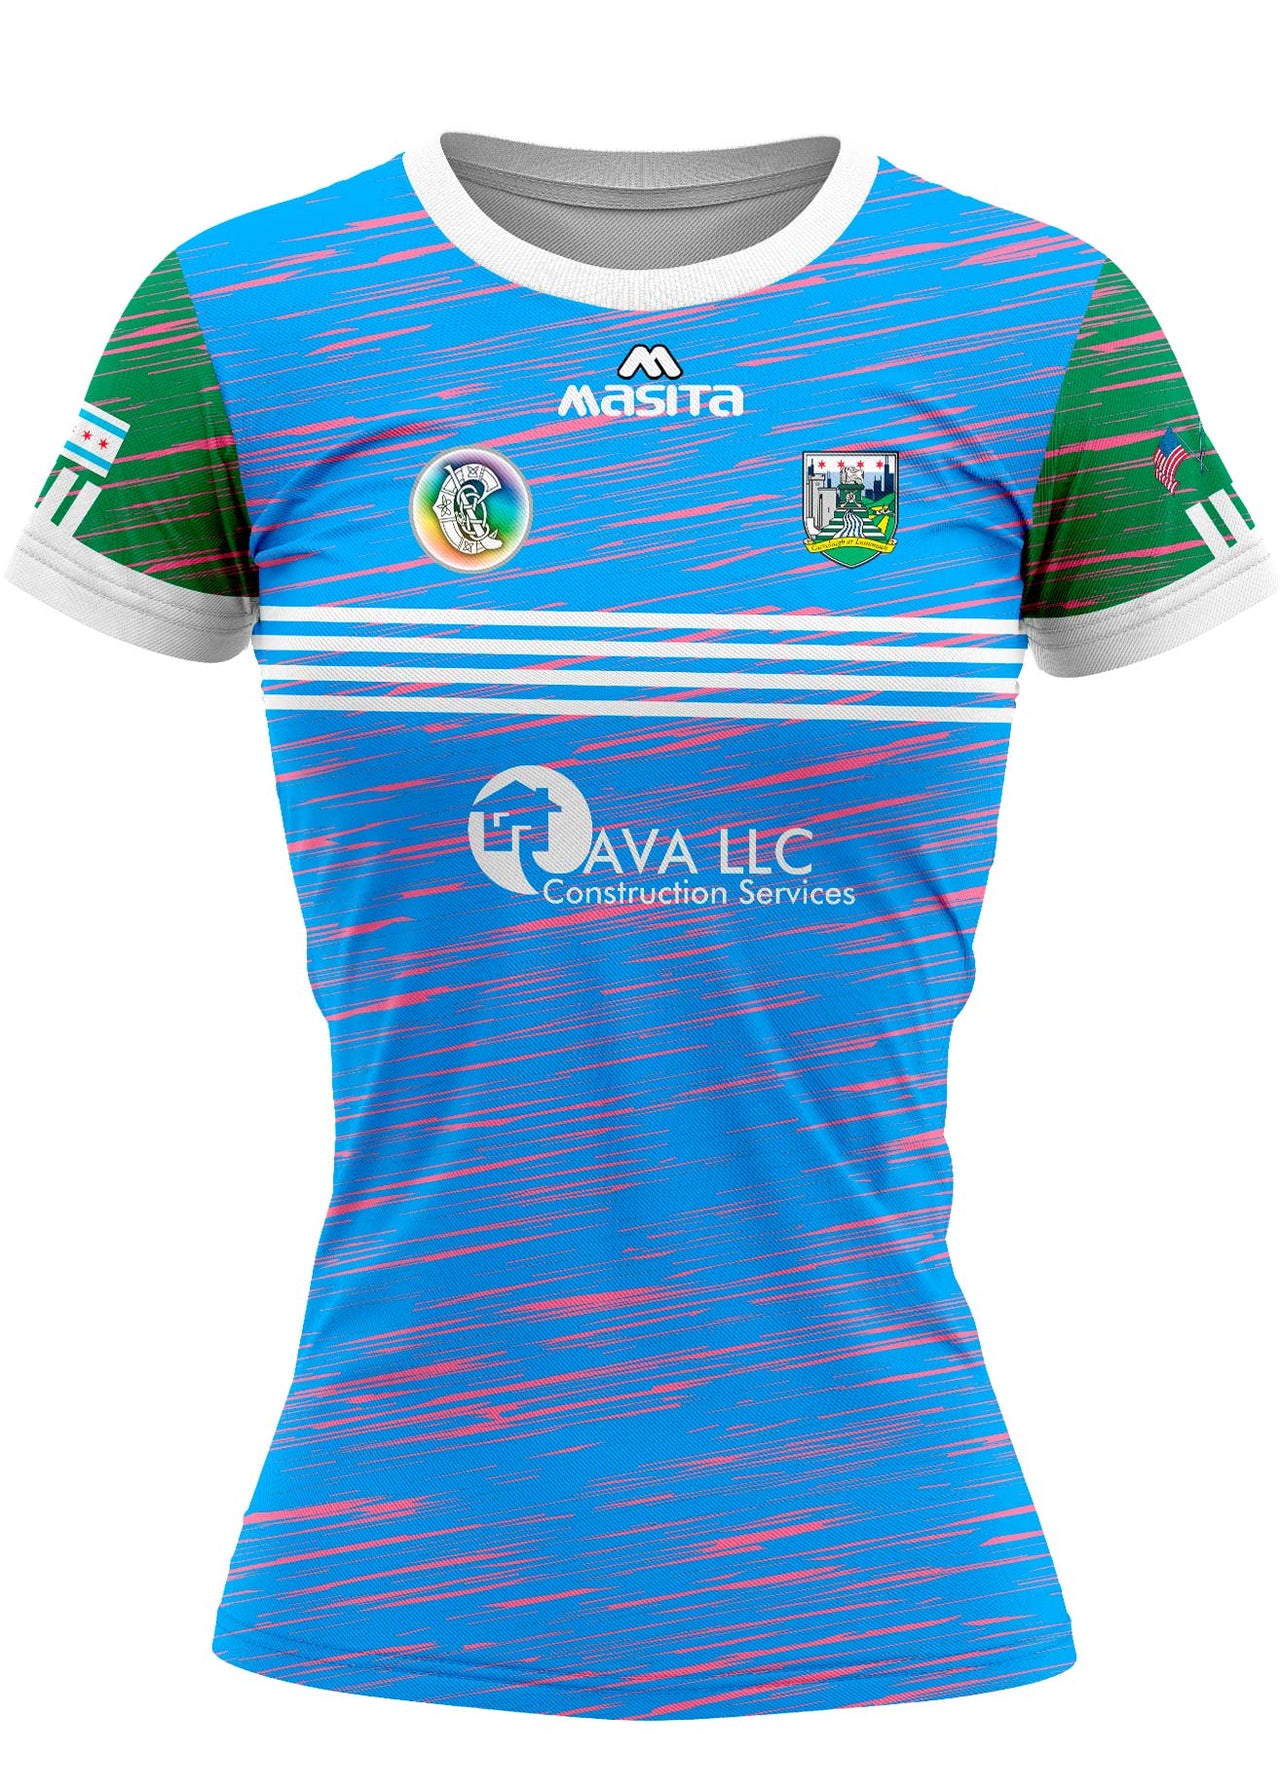 Limerick Chicago Youth Camogie Home Jersey Kids